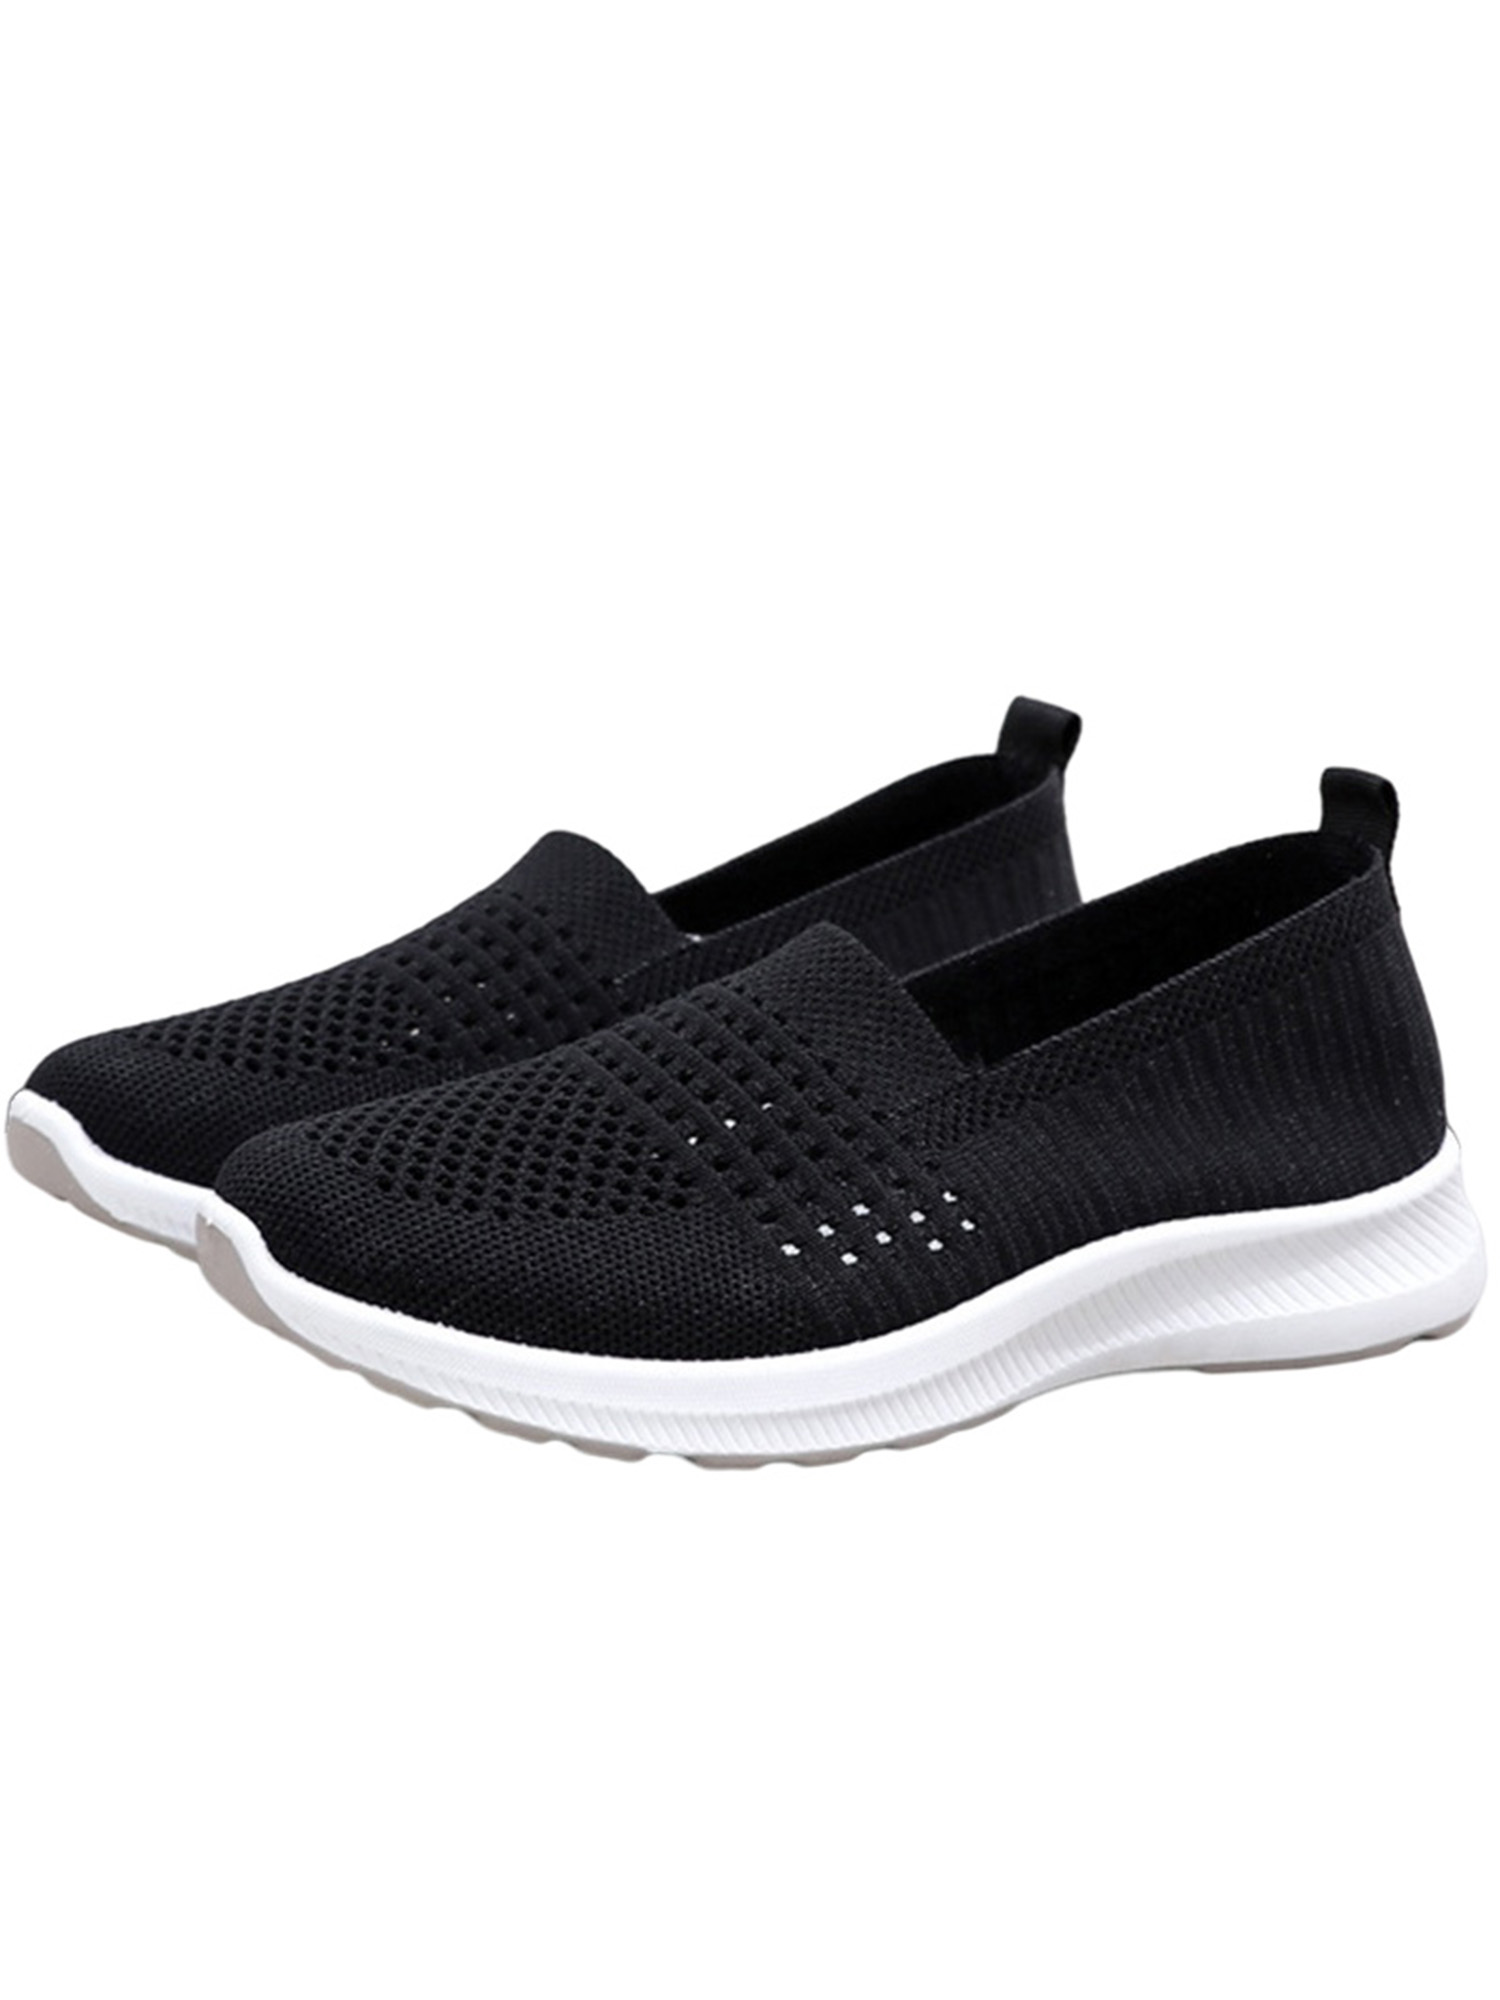 Avamo Mens Sports Footwear Tennis Breathable Jogging Lightweight Shoes - image 1 of 2